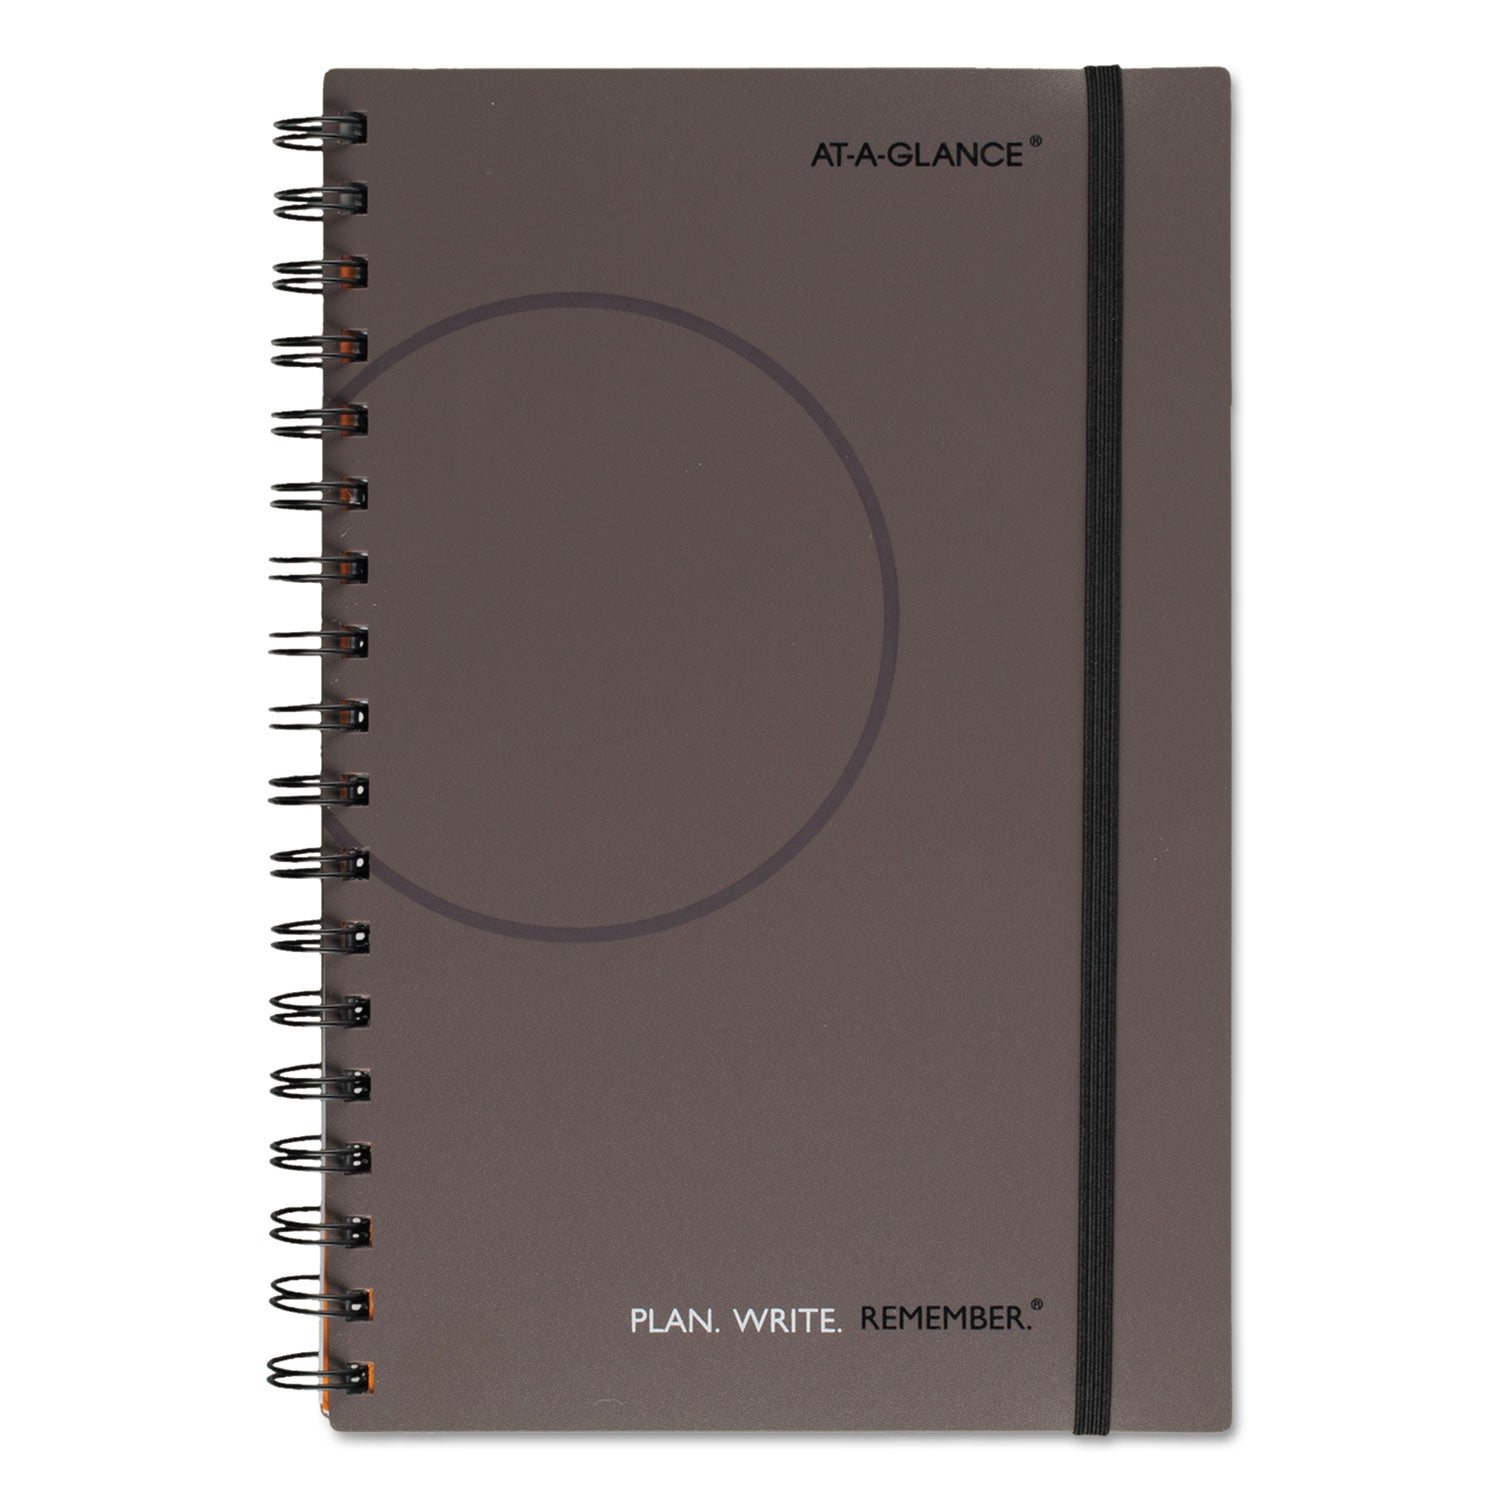 Plan. Write. Remember. Planning Notebook Two Days Per Page , 9 x 6, Gray Cover, Undated - 